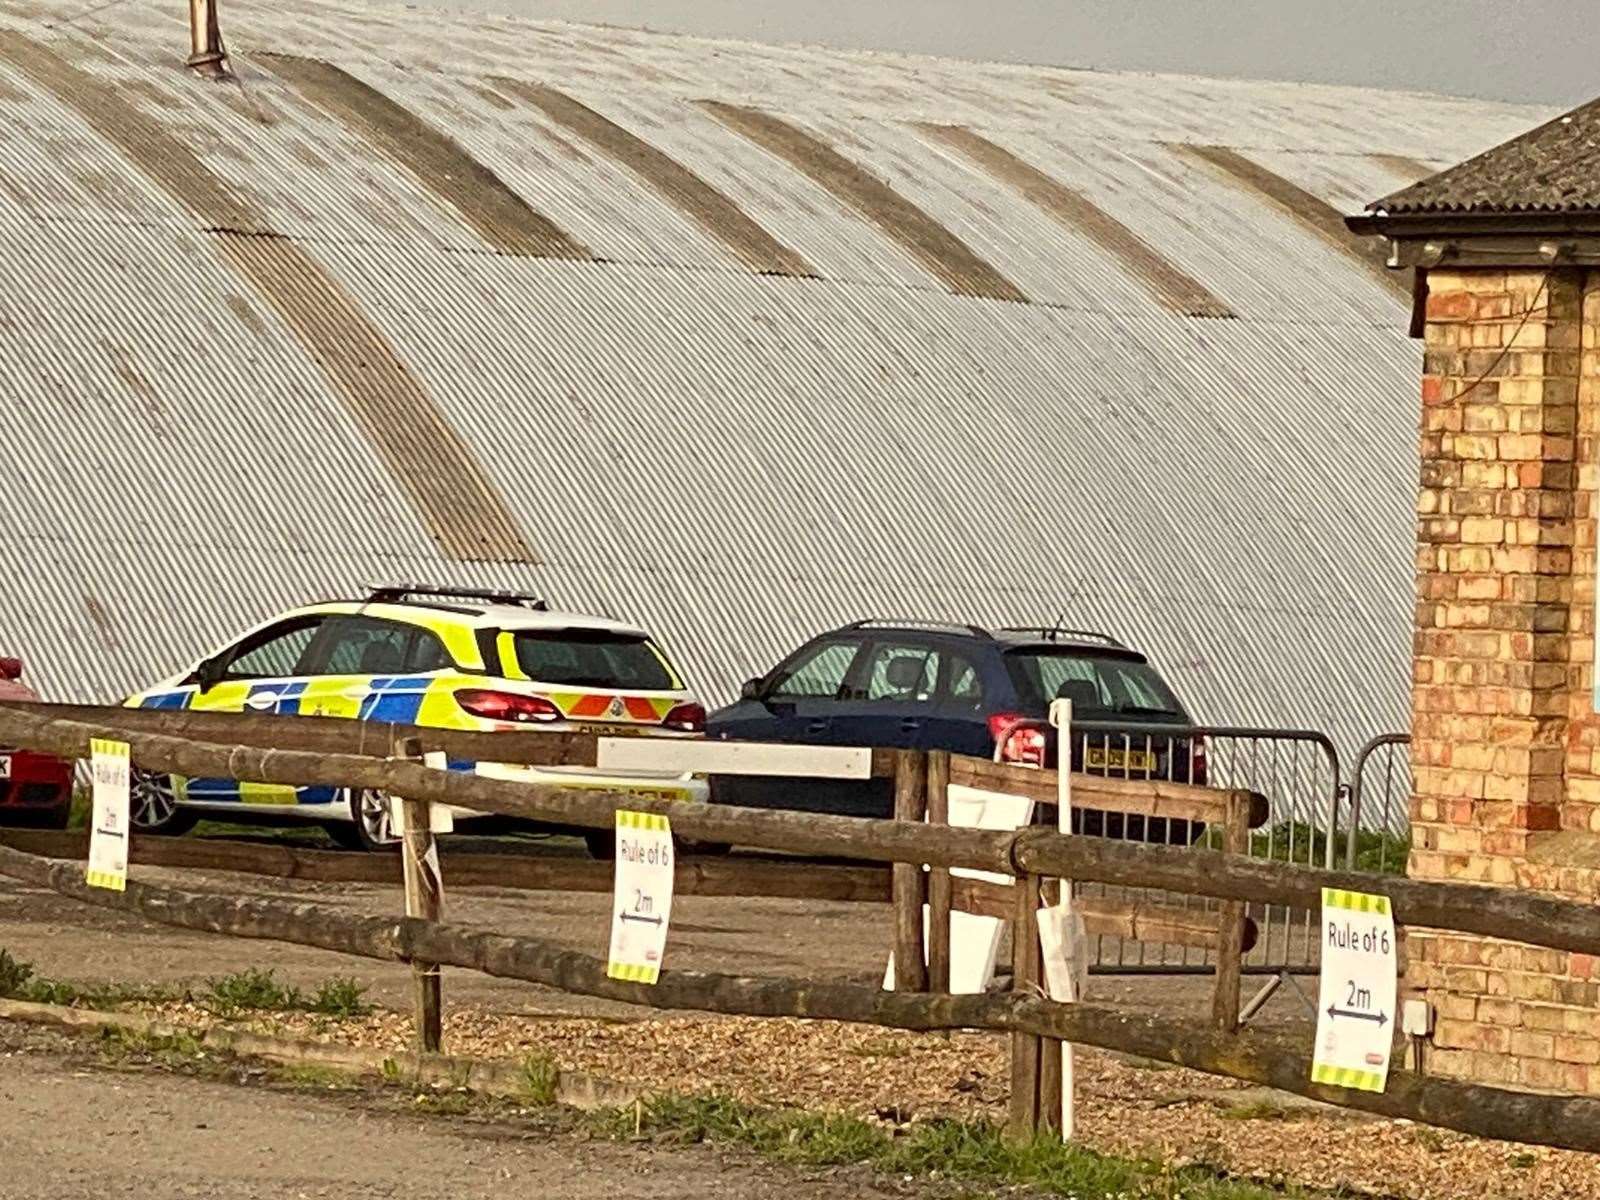 Emergency services were called to a farm in Ashford, but Mr Buchanan was pronounced dead at the scene